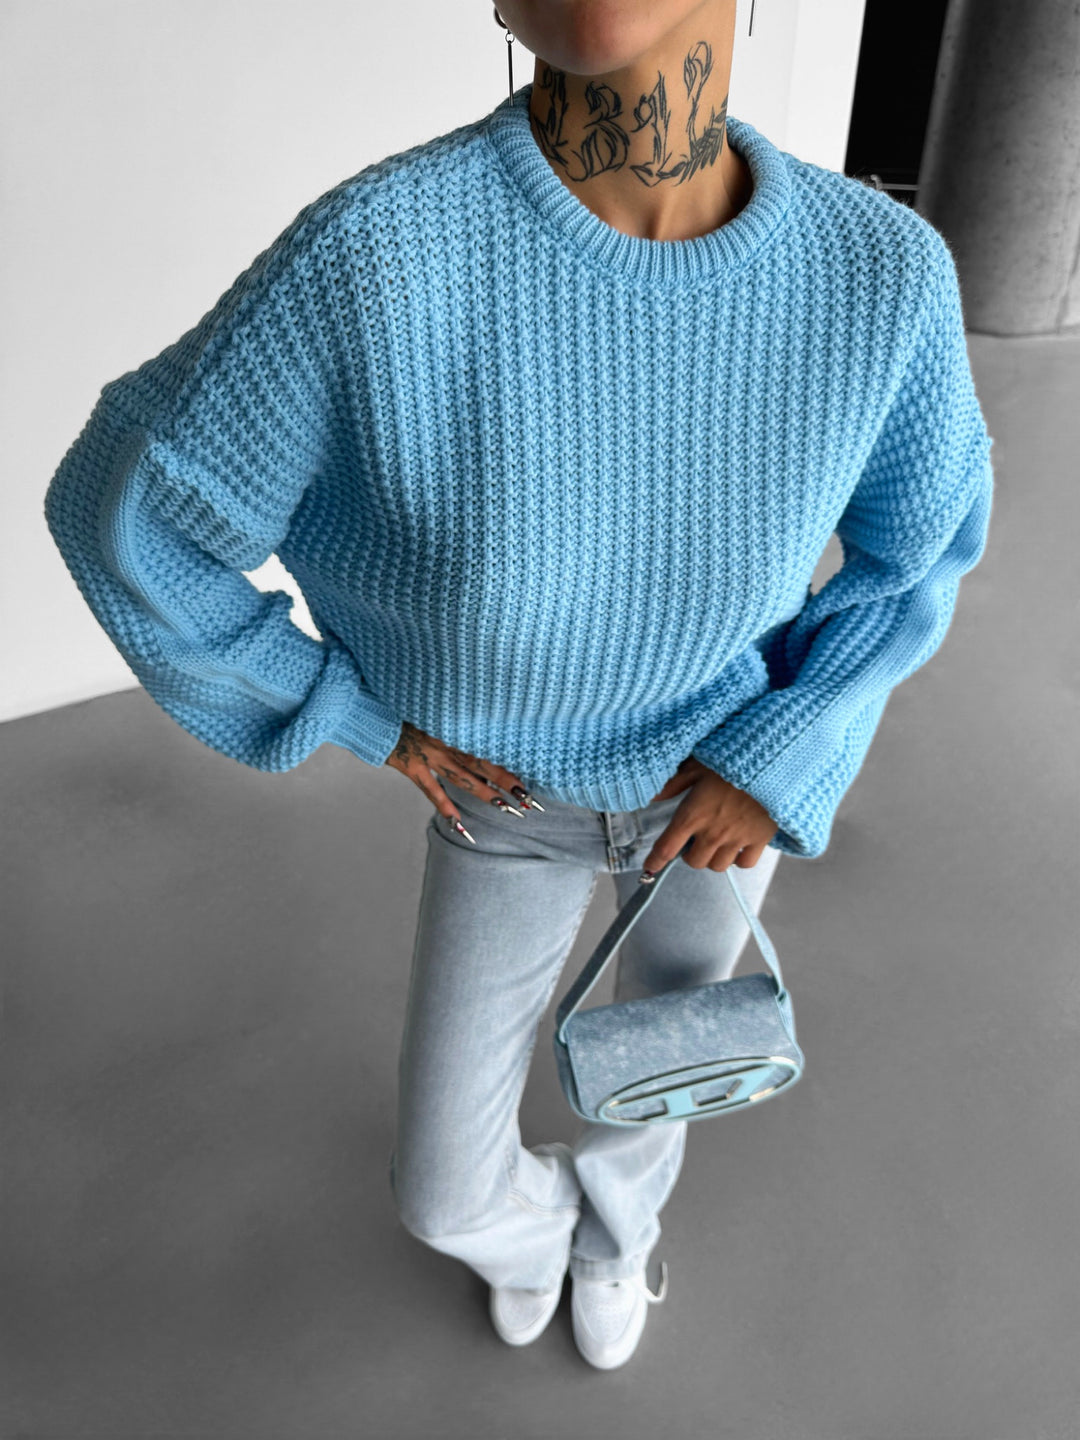 Oversize Puffer Arms Knit Sweater - Baby Blue